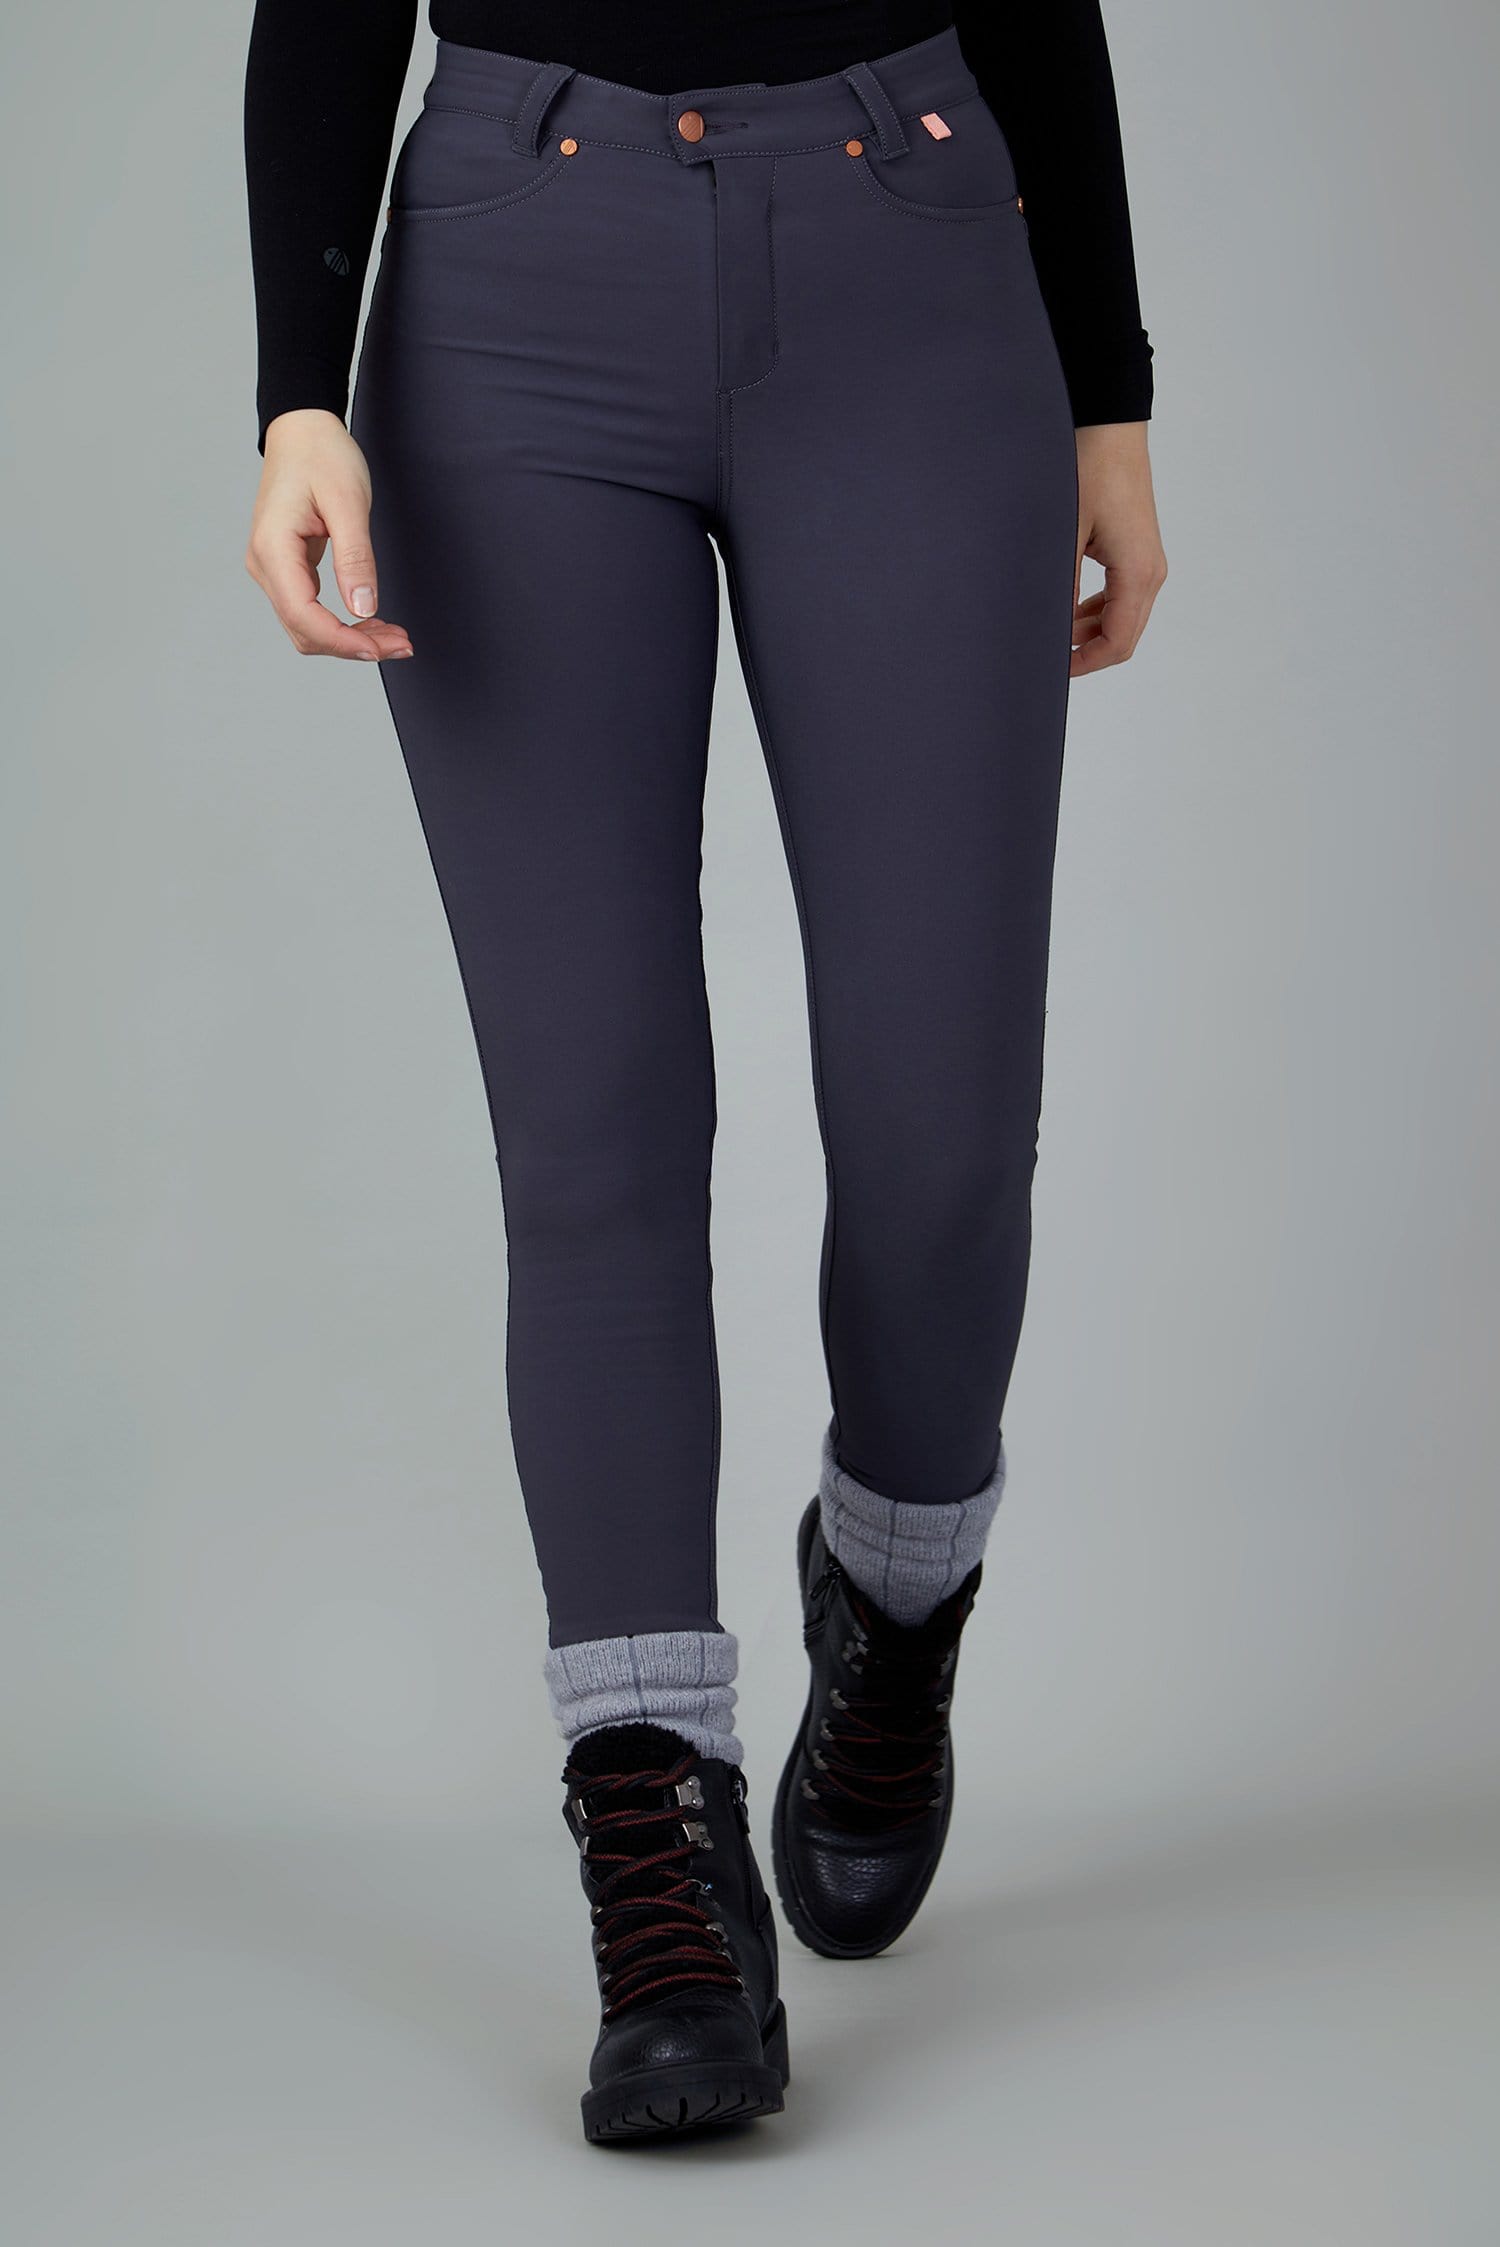 The Aventurite Stretch Skinny Outdoor Trousers - Obsidian - 28l / Uk10 - Womens - Acai Outdoorwear